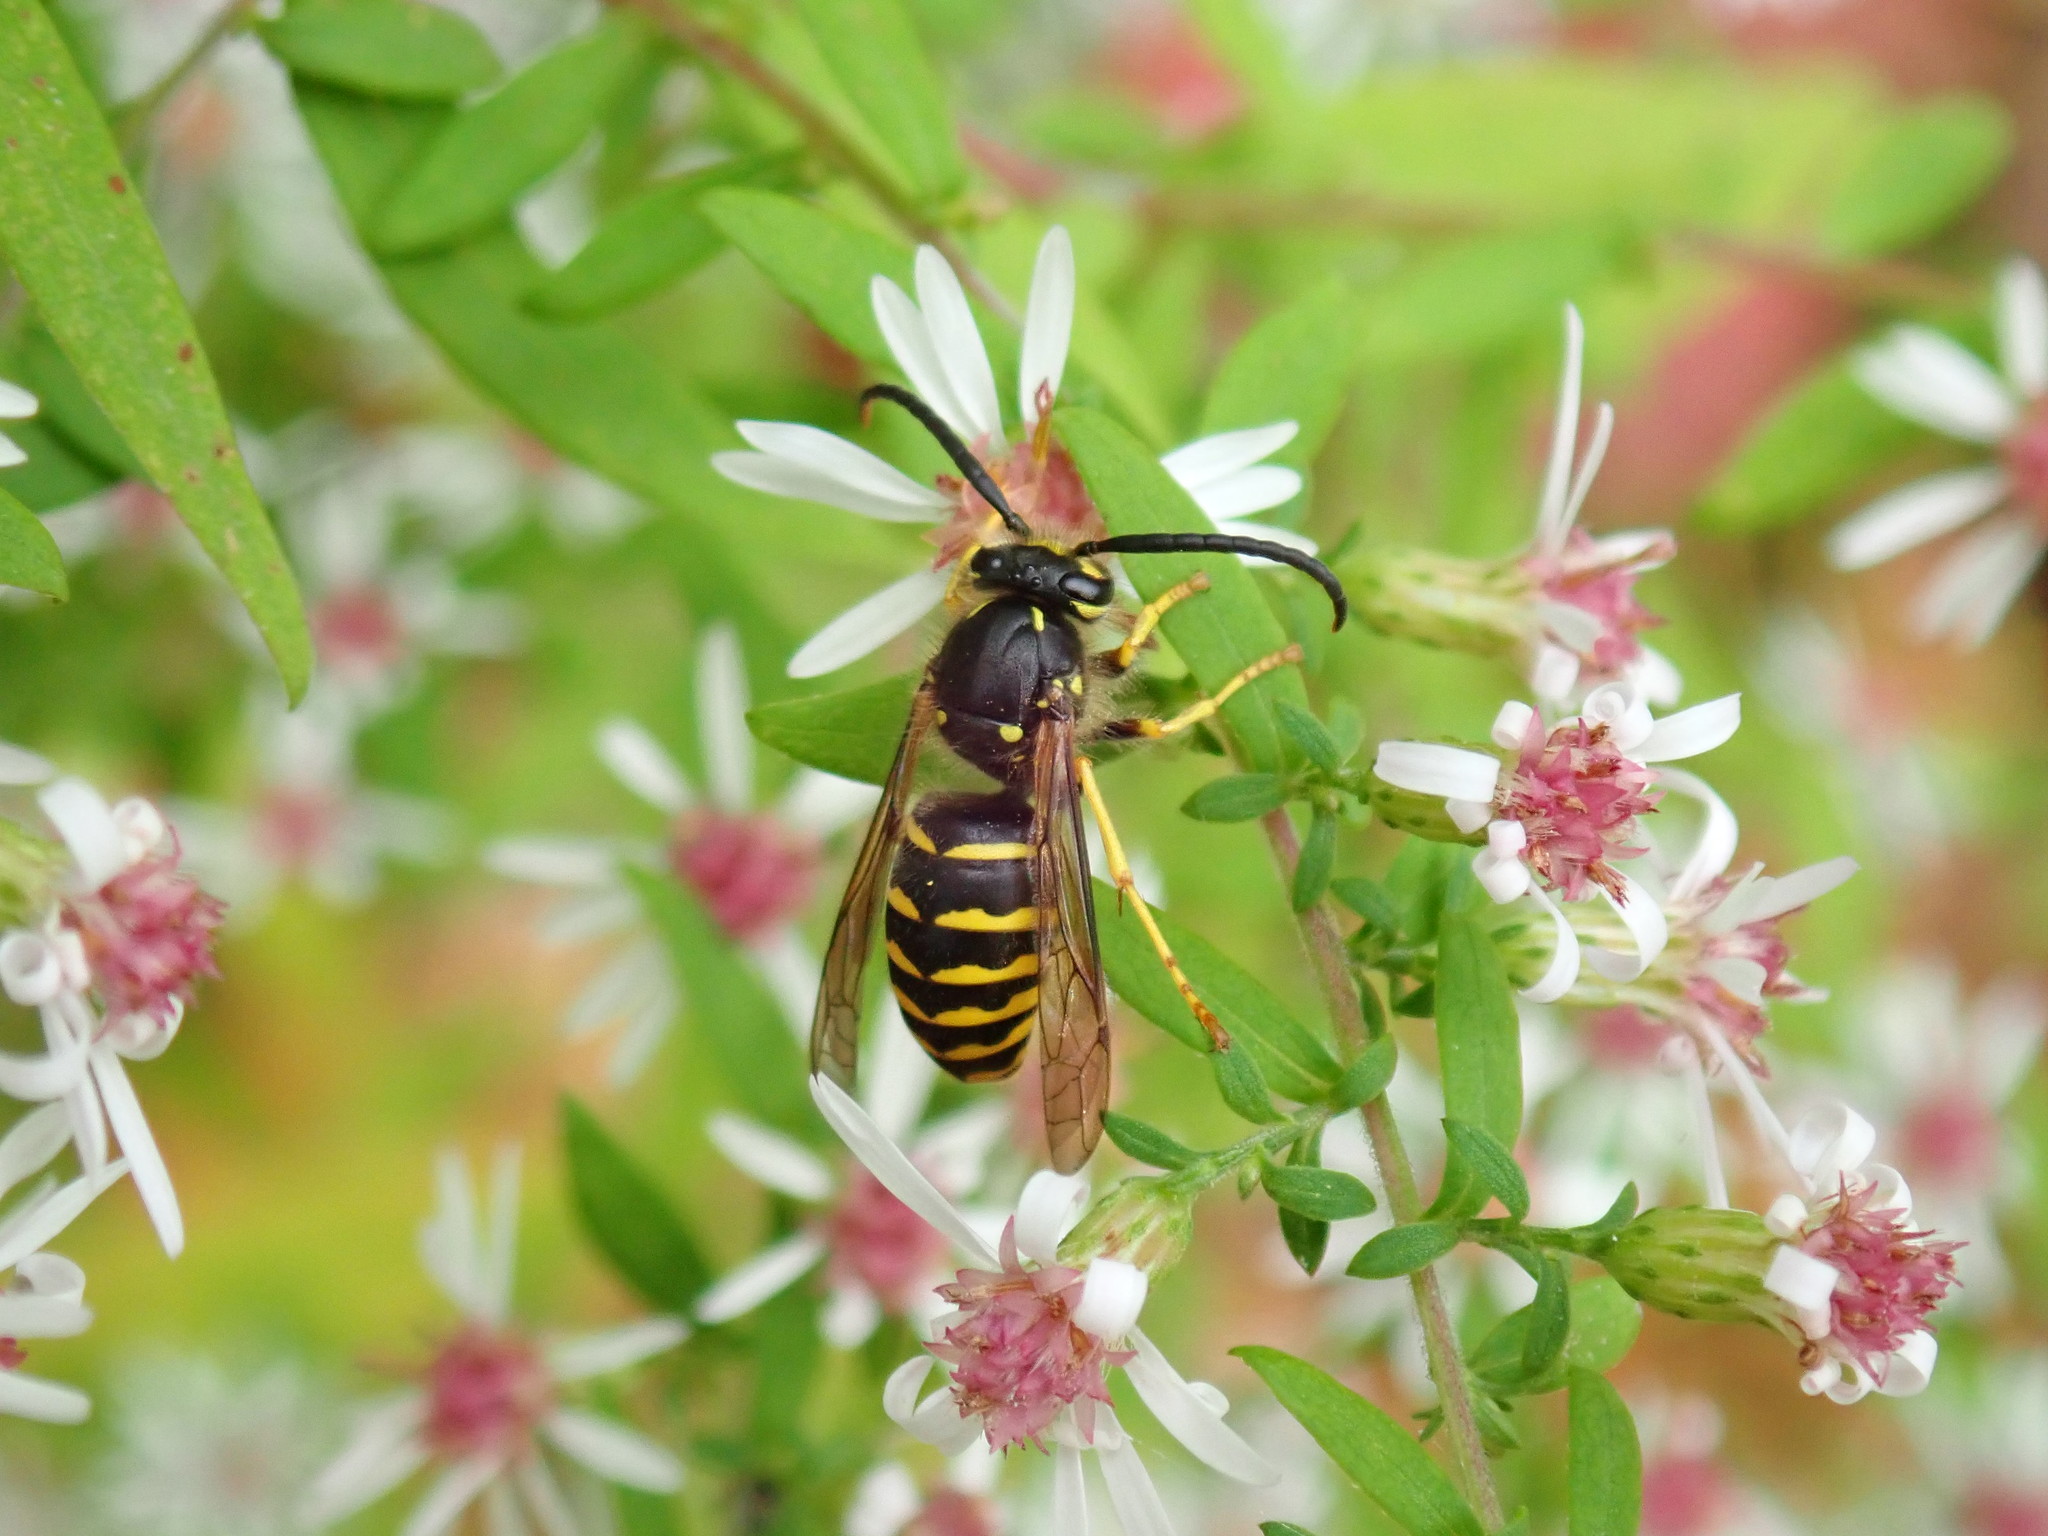 a common aerial yellowjacket resting on a plant with clusters of pink flowers